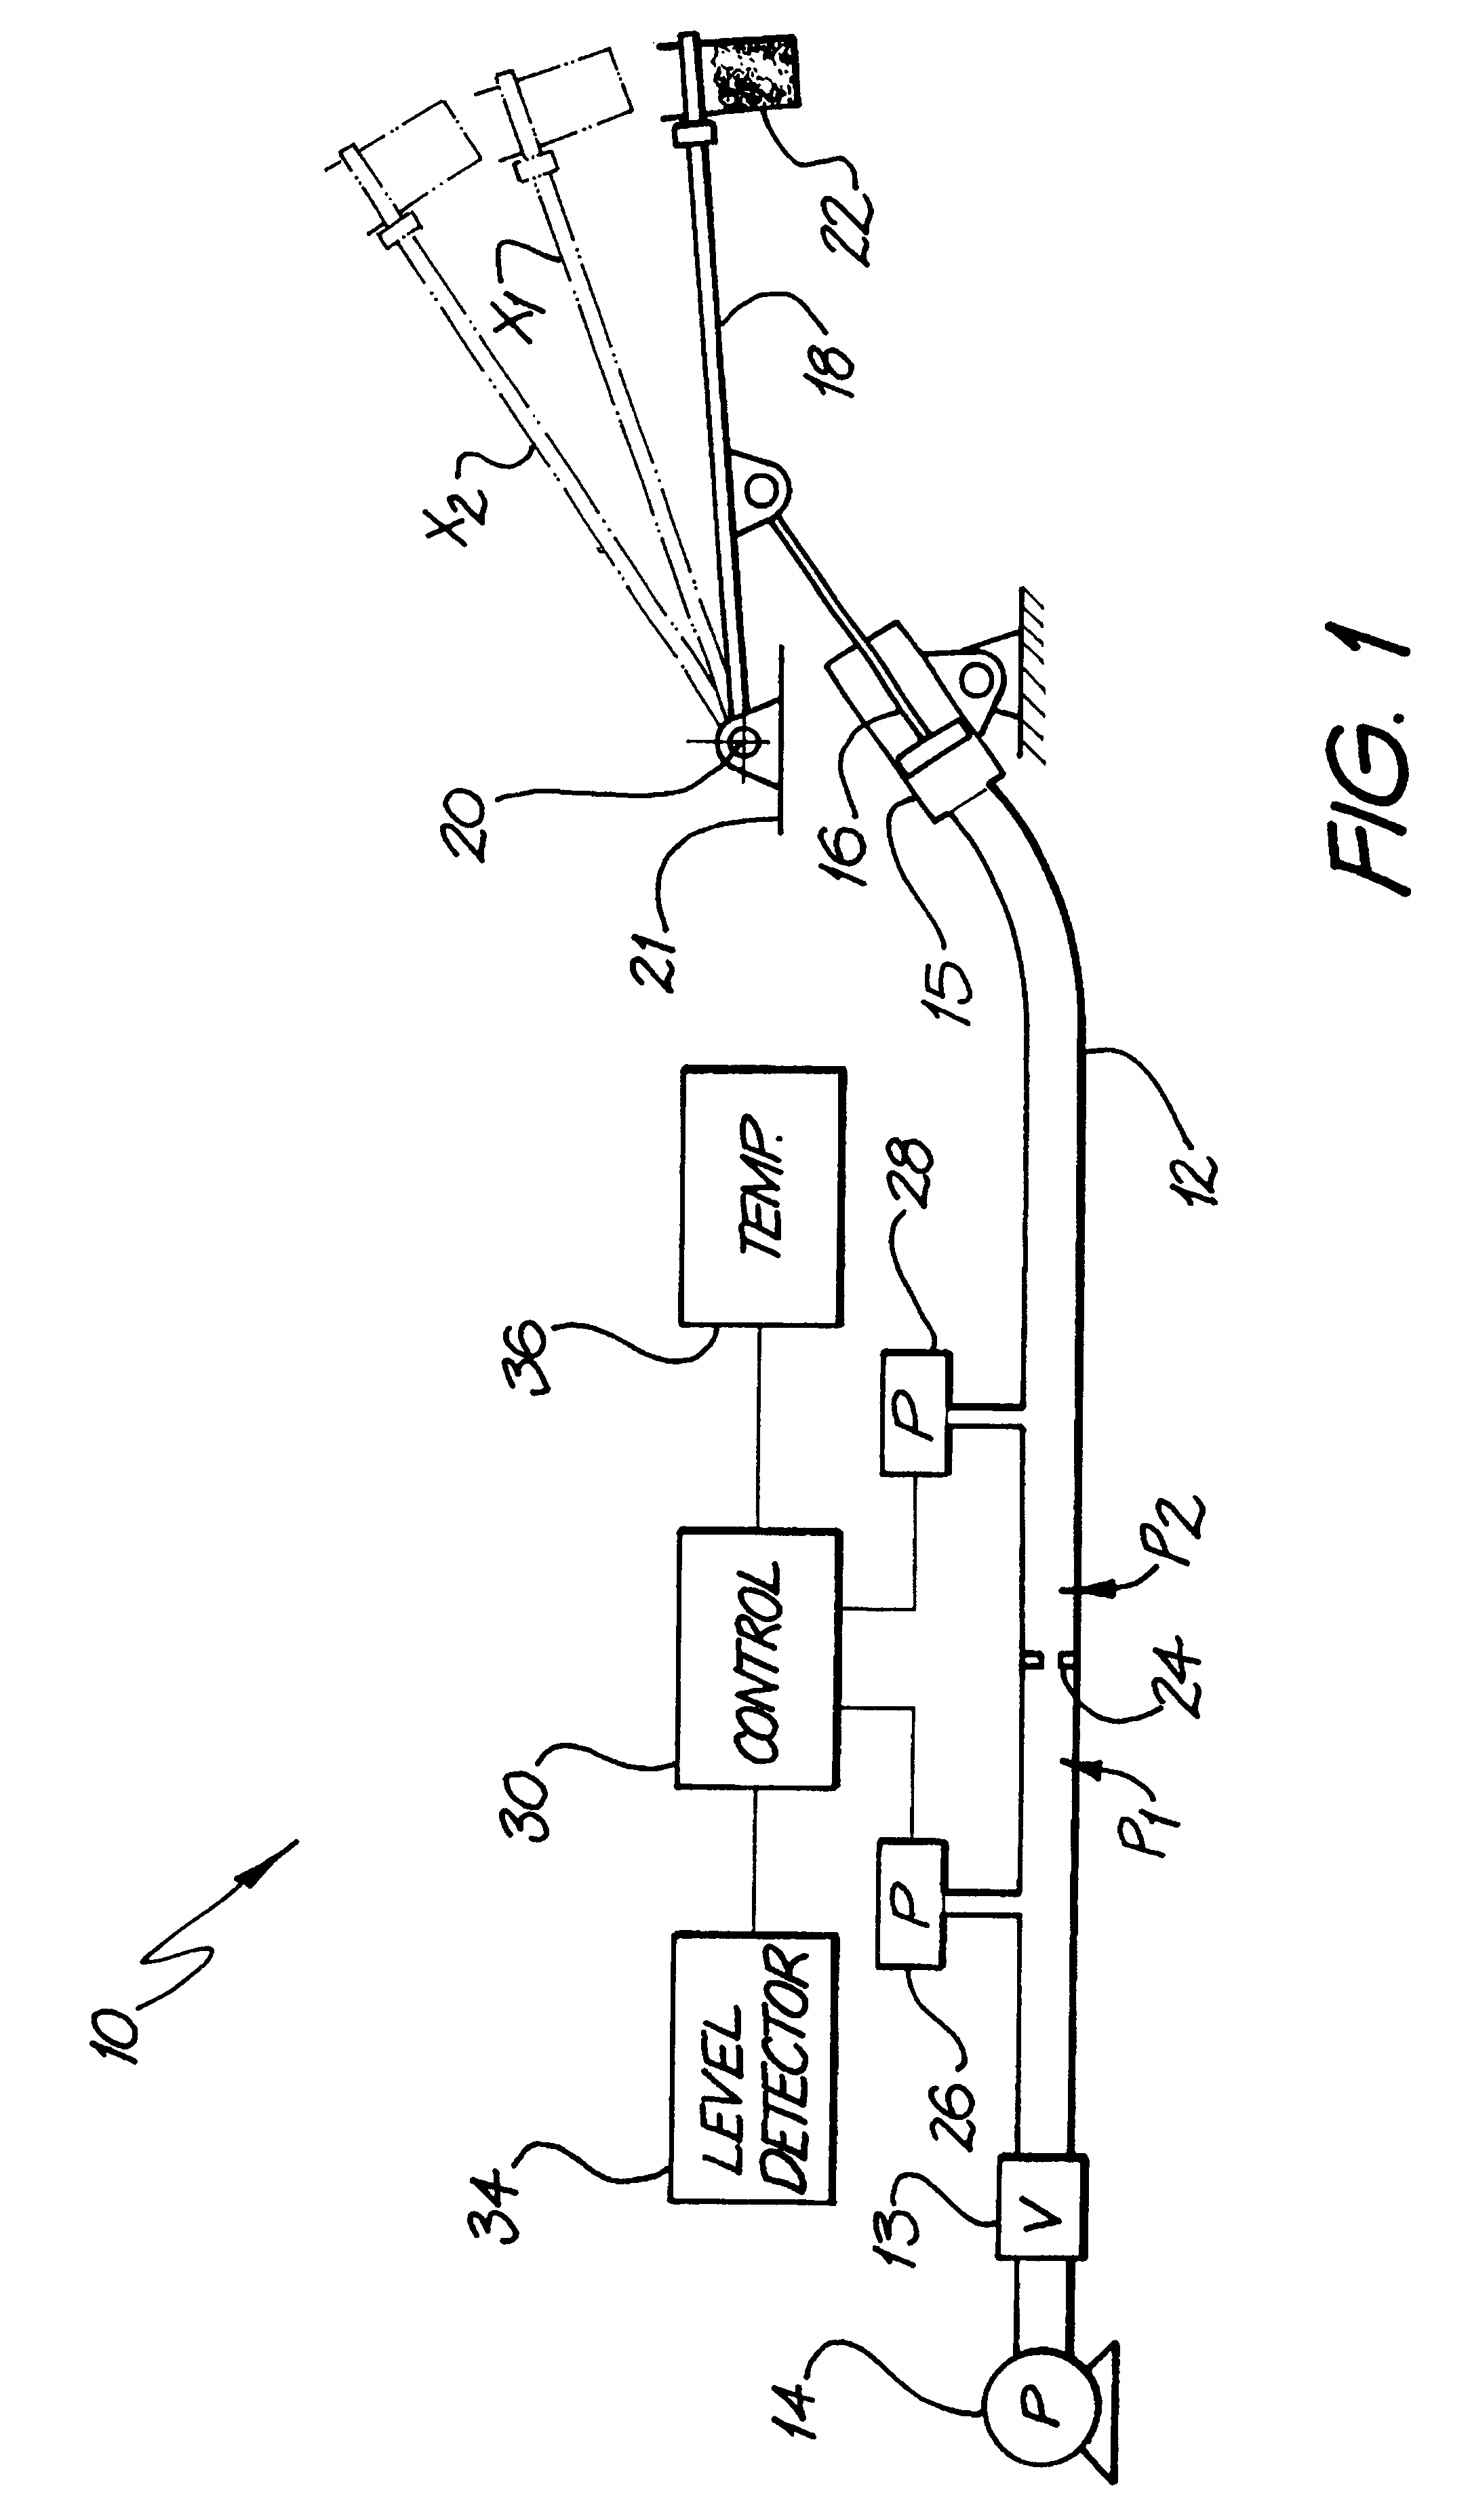 Hydraulic weighing apparatus and method